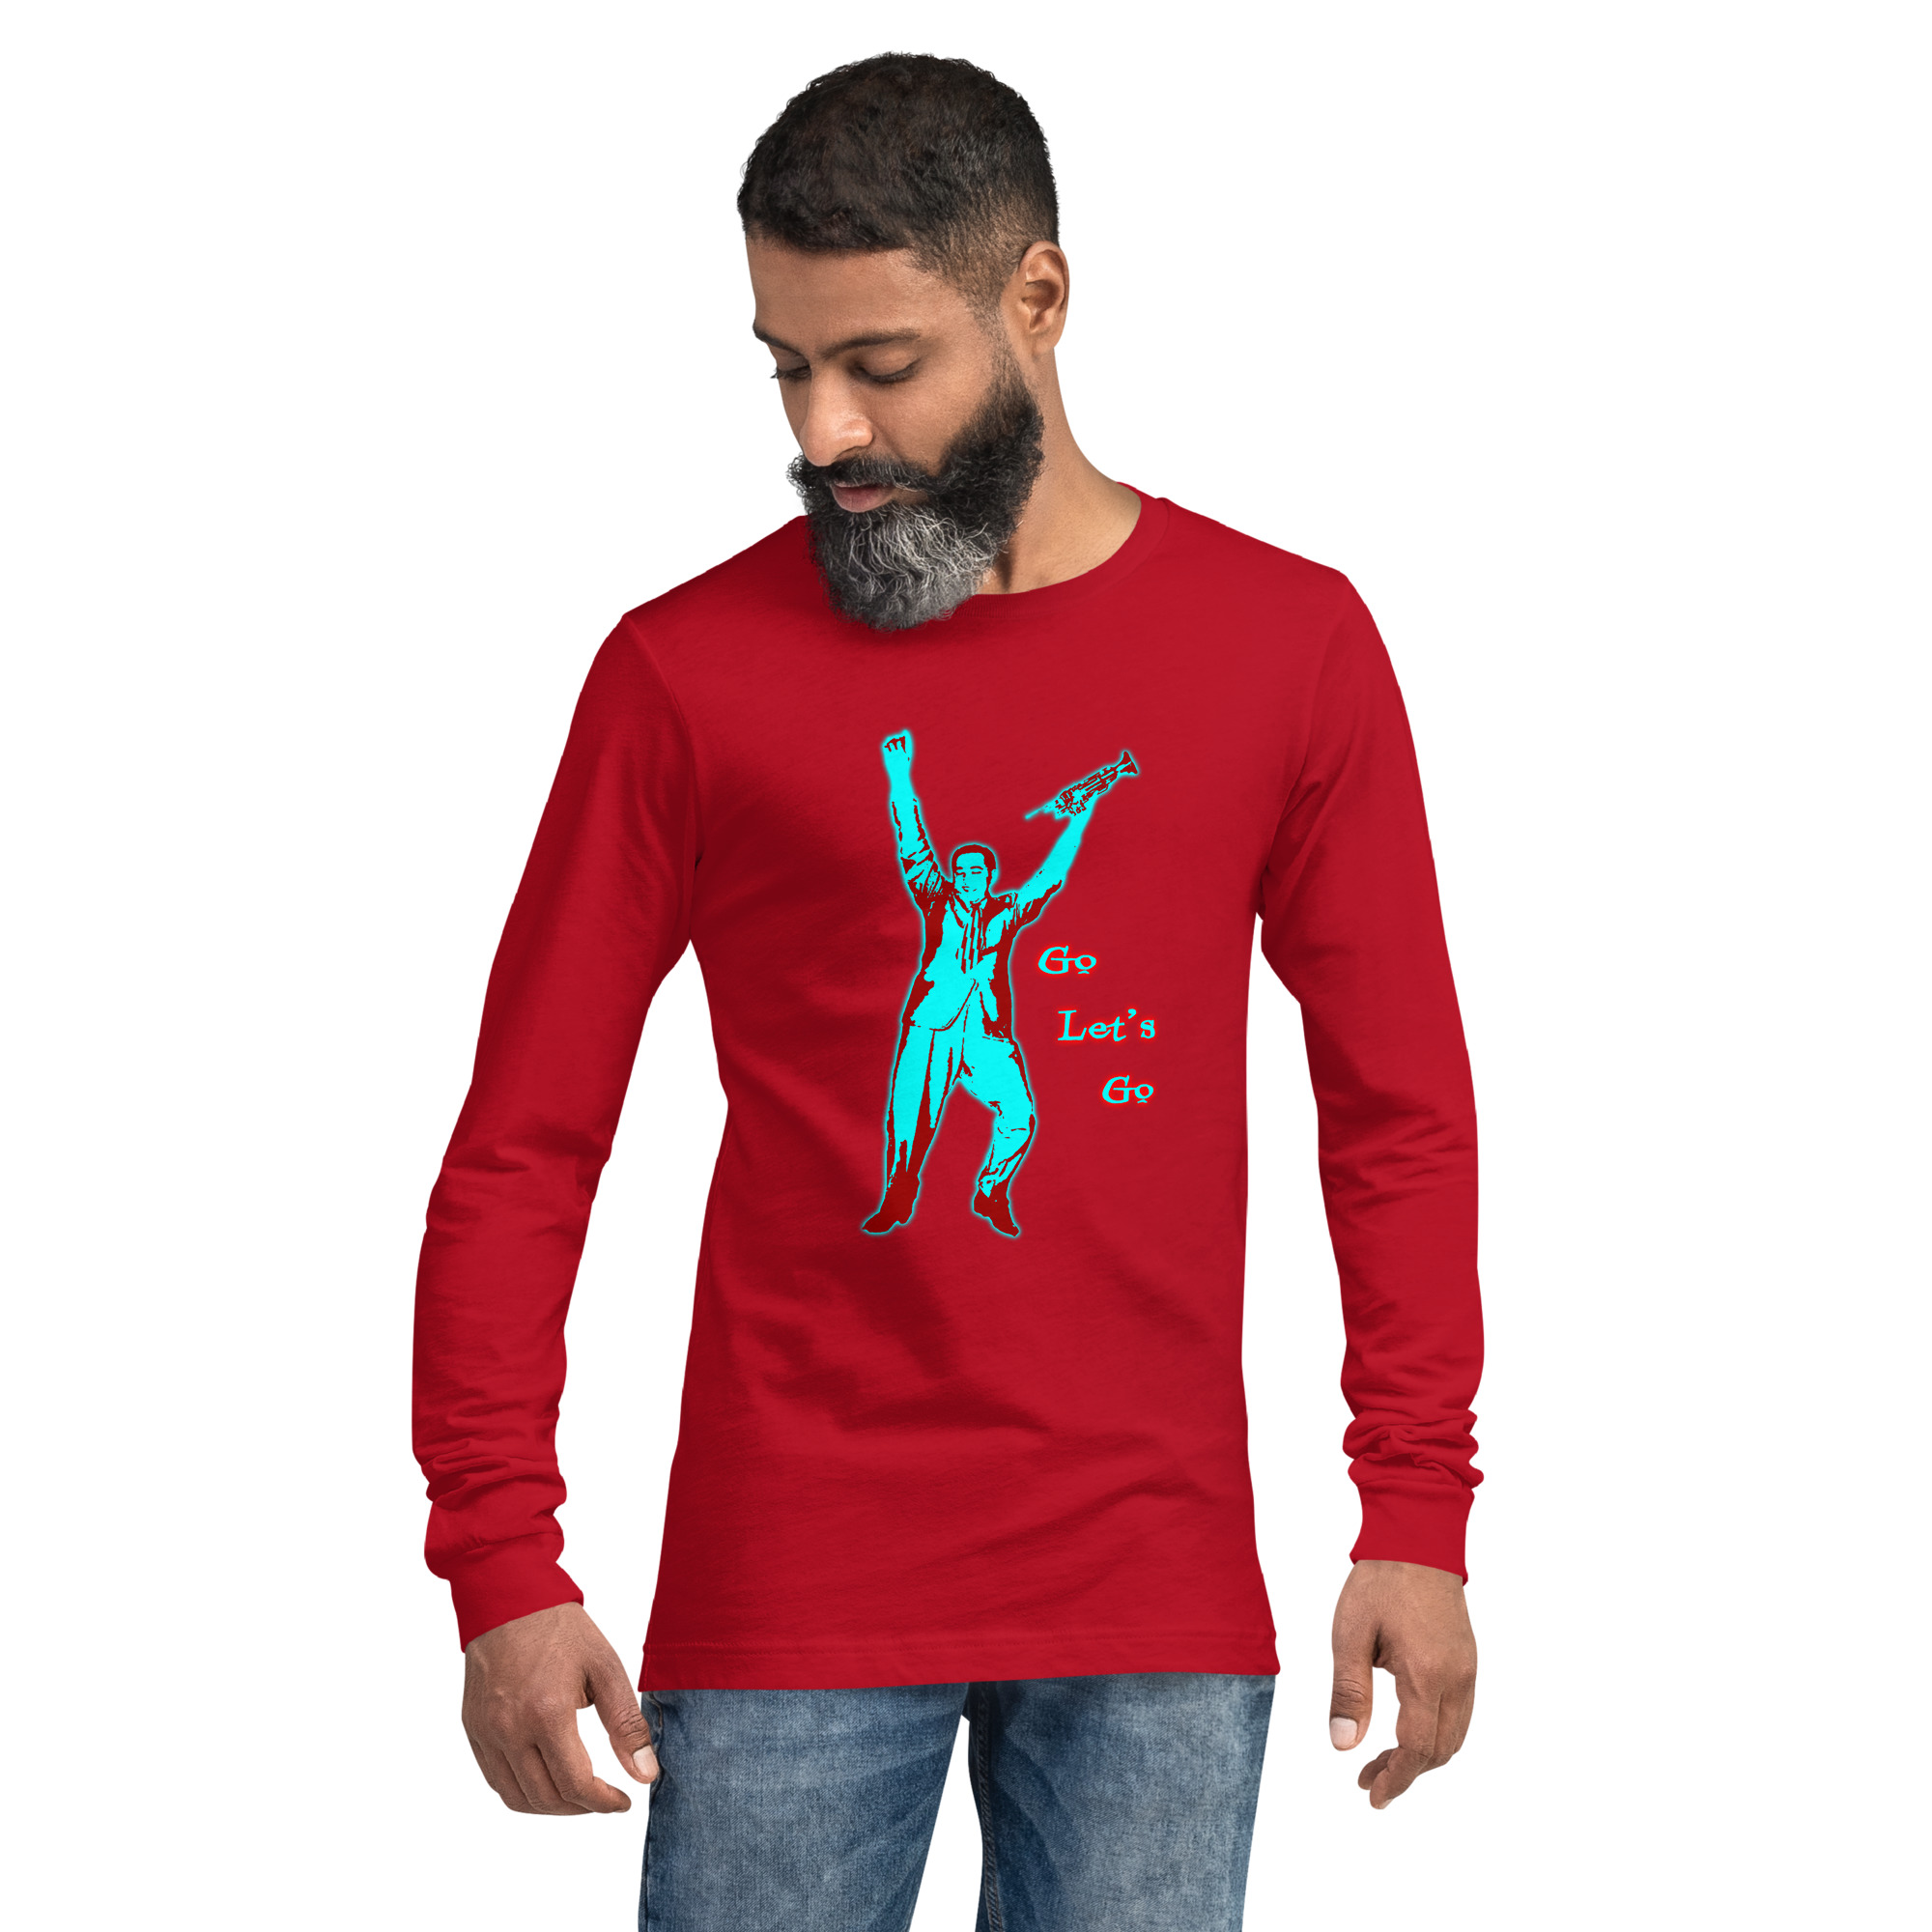 Go Let's Go Unisex Long Sleeve Tee – Louis Prima Jr and the Witnesses